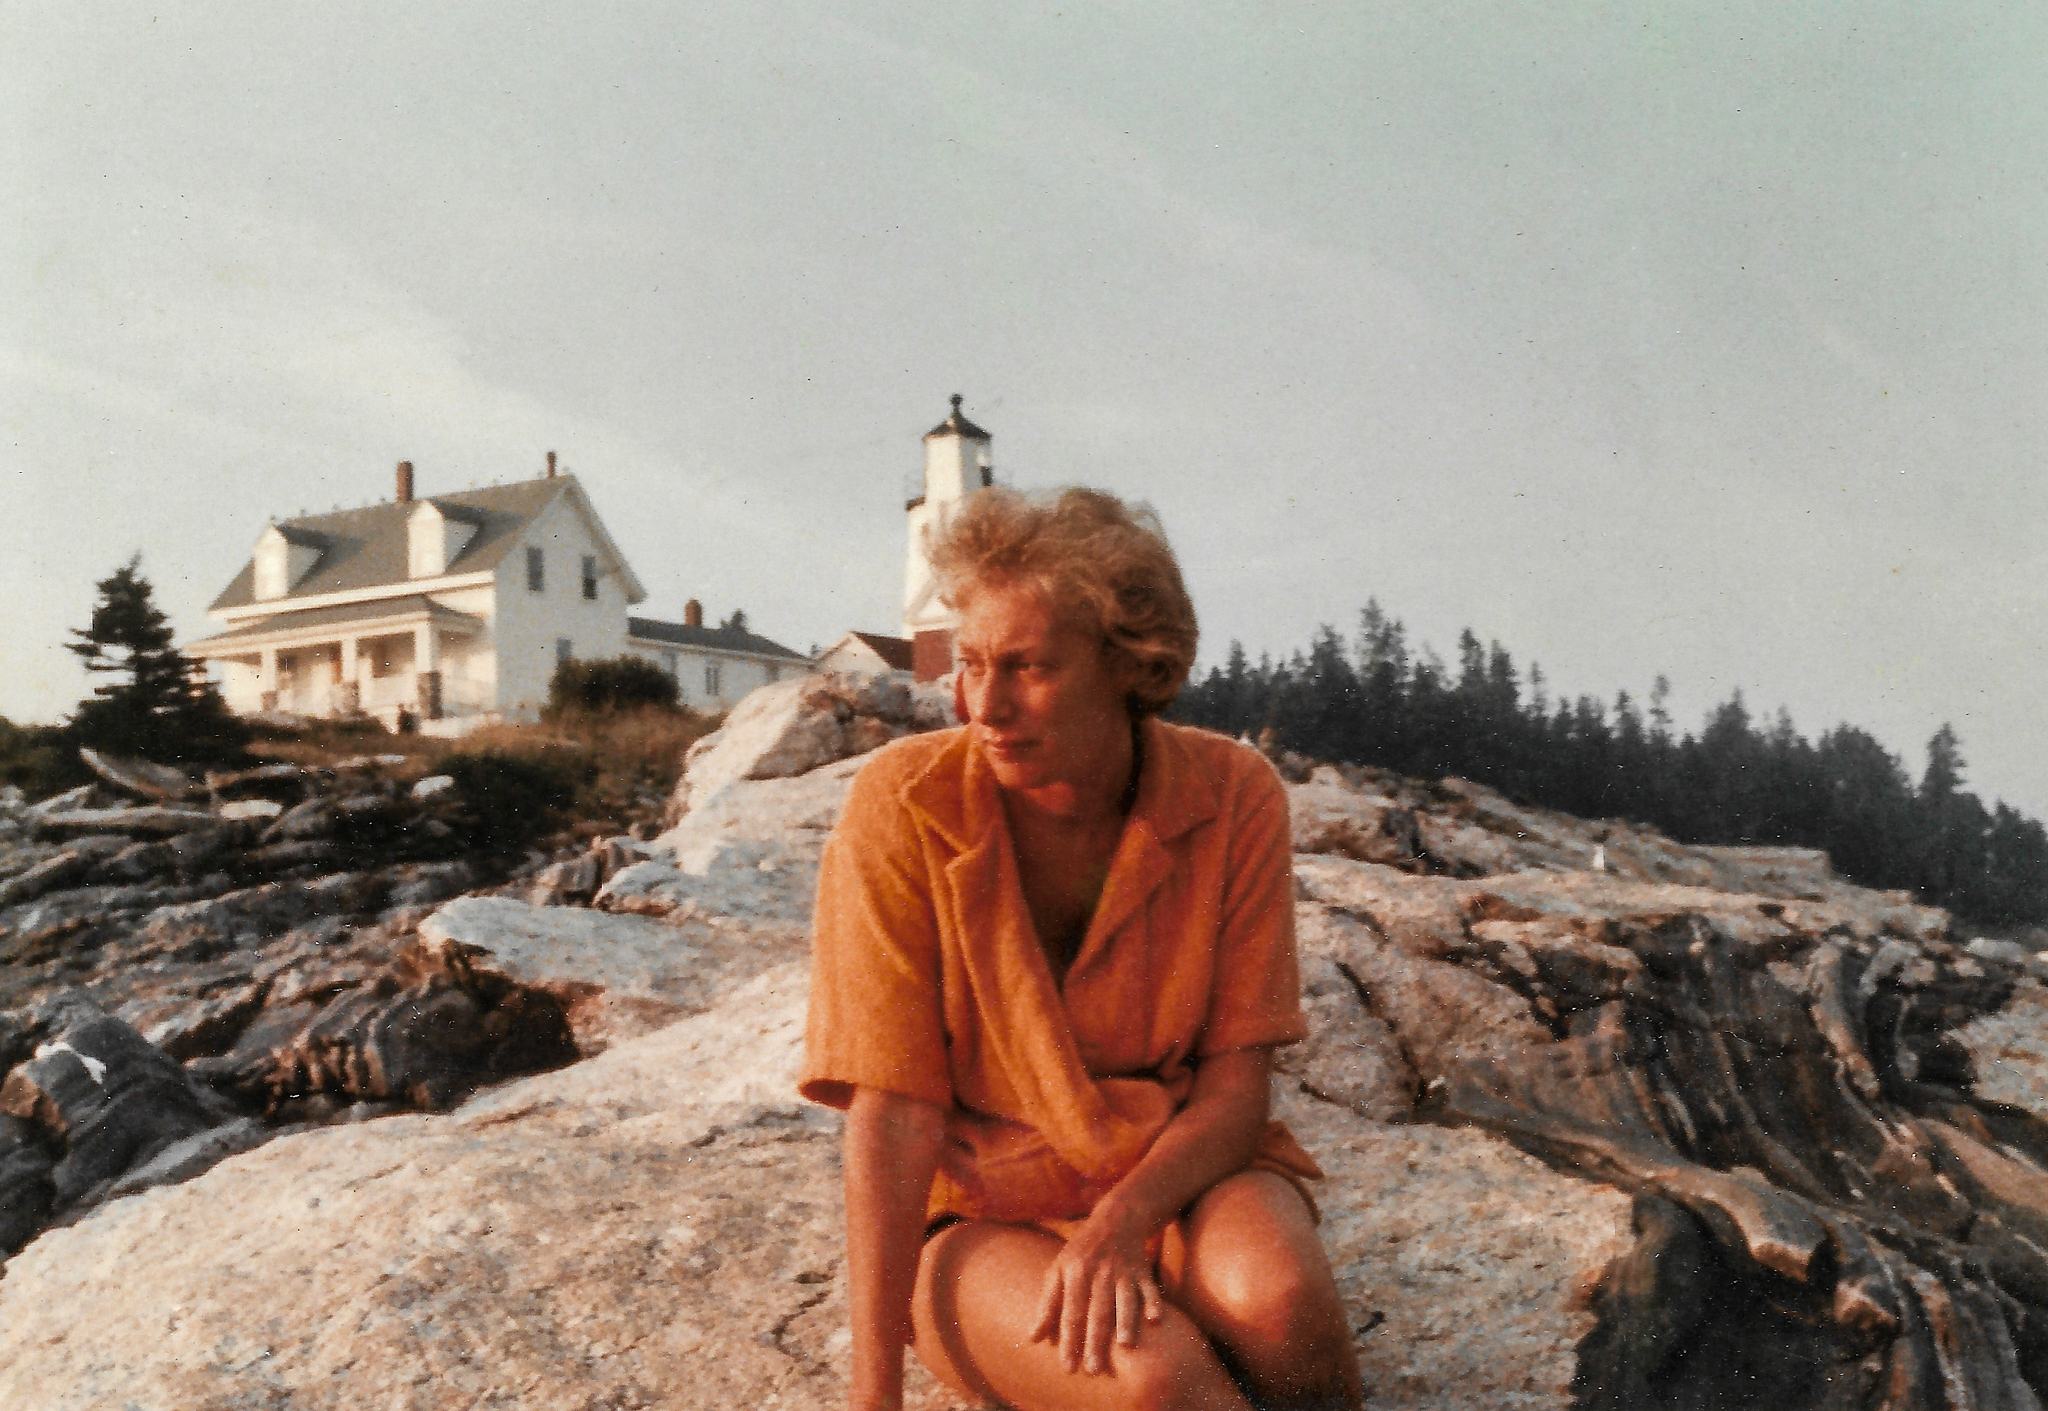 A person sits on rocks with white house and lighthouse in background.